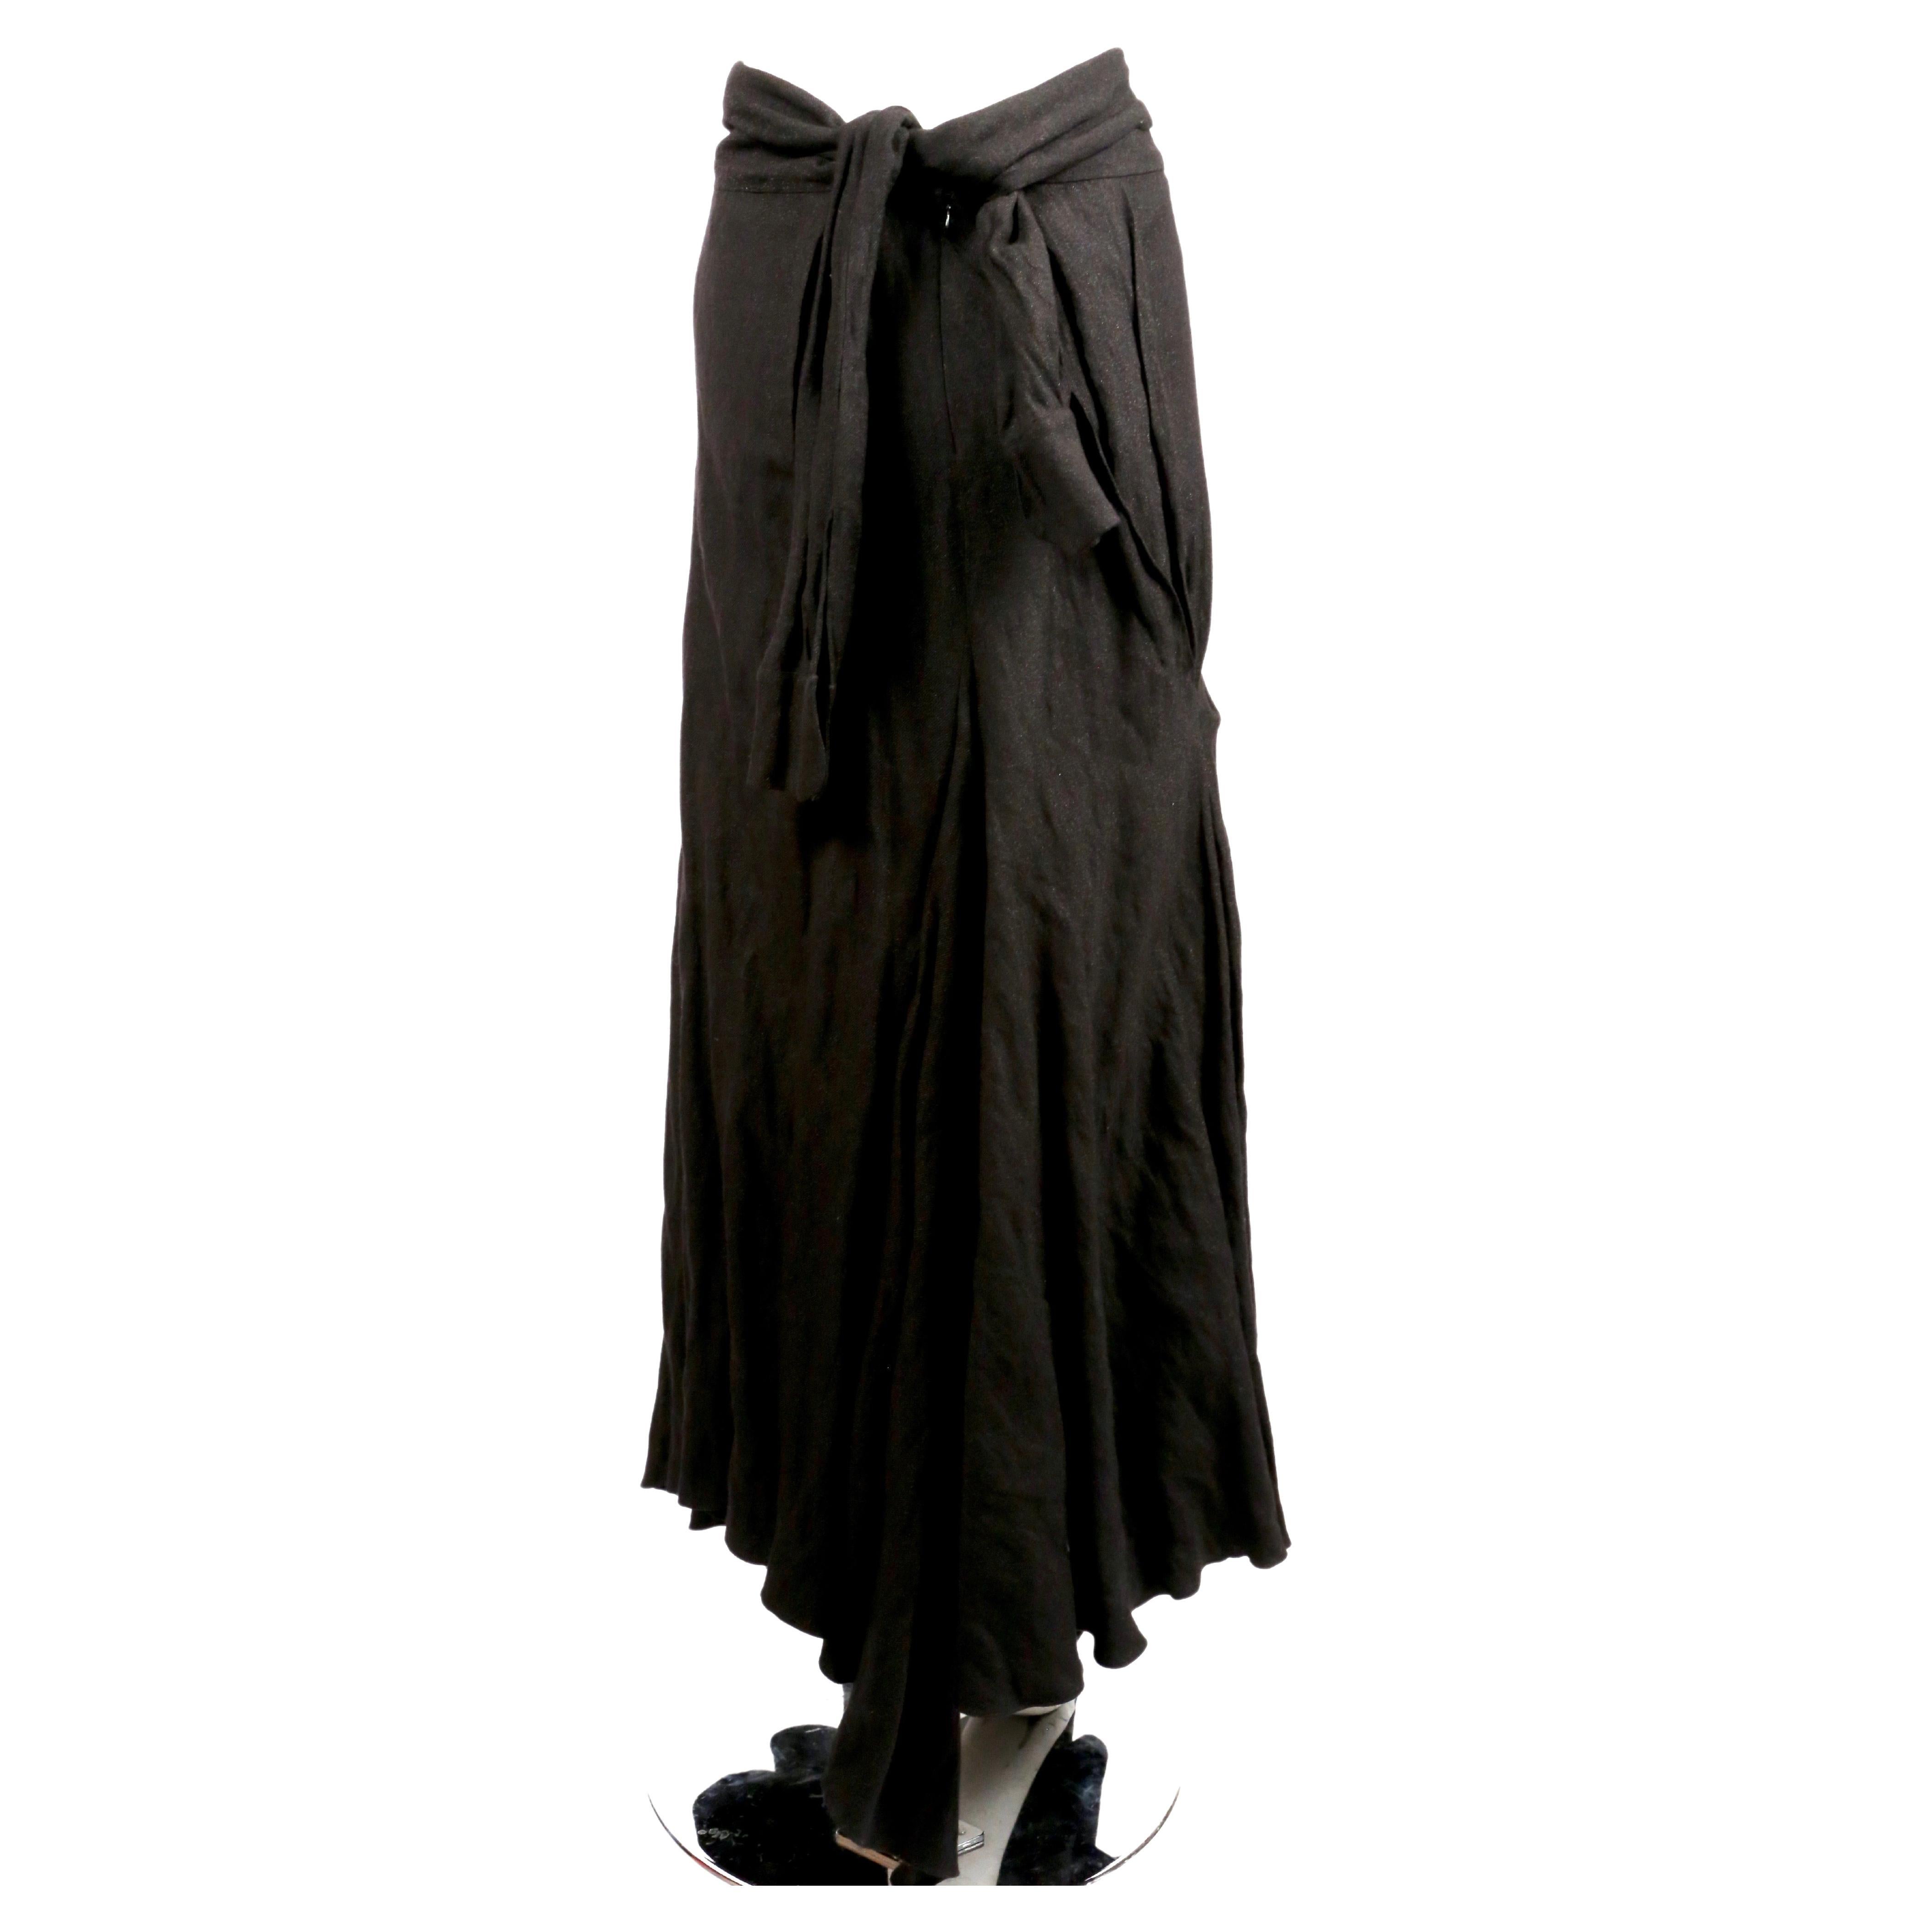 Soft-black, draped maxi skirt with unique 'shirt-sleeve' ties at back of waist designed by John Galliano dating to the early 2000's. Skirt has great movement when you walk. French size 38. Approximate measurements: waist 29